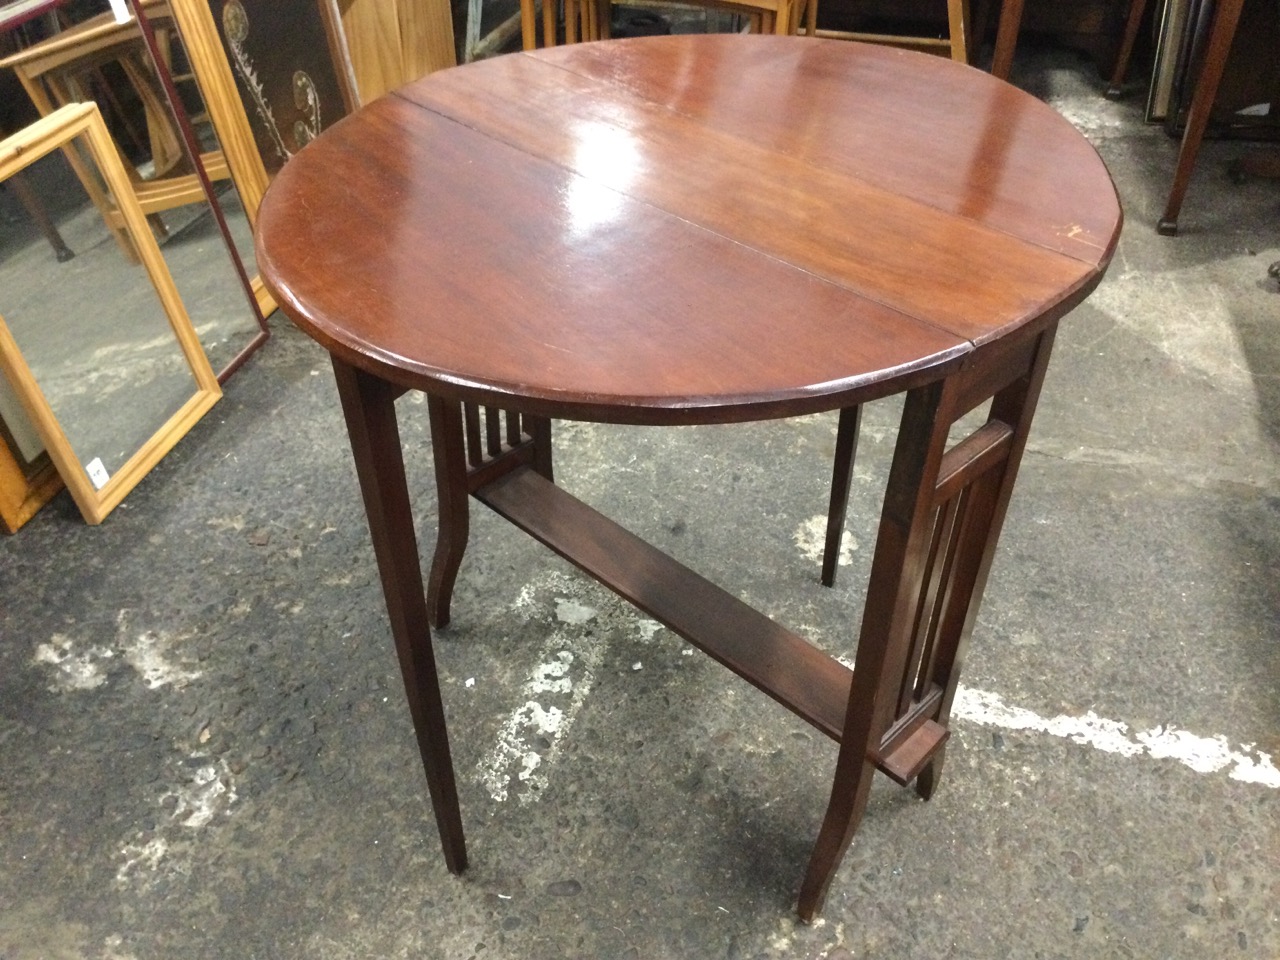 An Edwardian mahogany sutherland table with oval moulded top and two leaves supported on swing legs, - Image 2 of 3